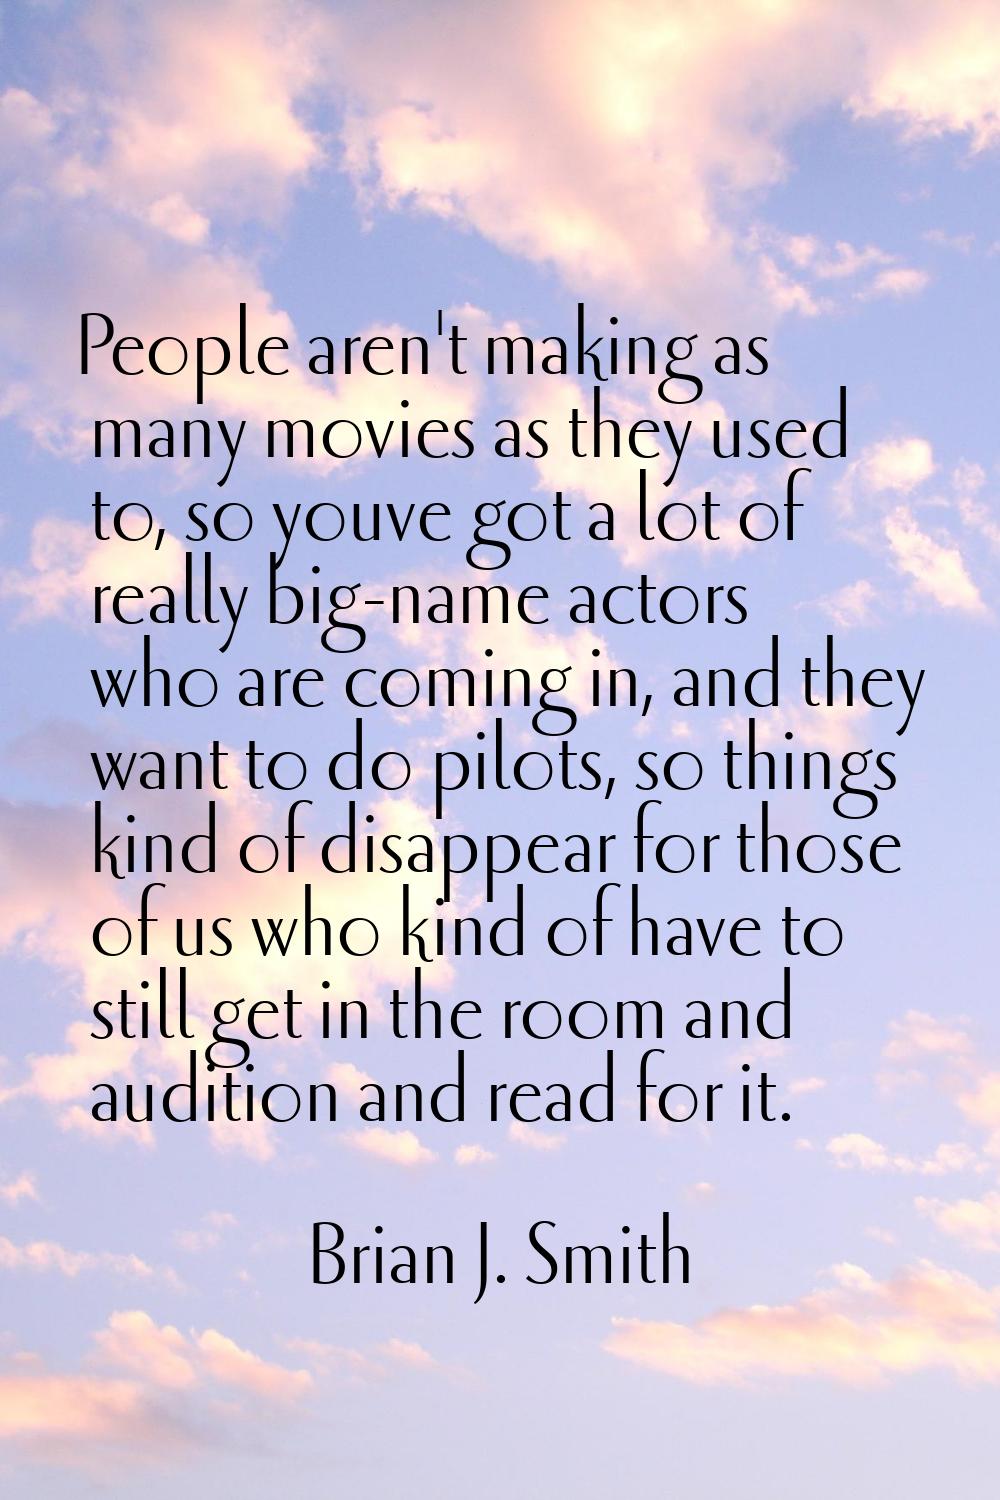 People aren't making as many movies as they used to, so youve got a lot of really big-name actors w